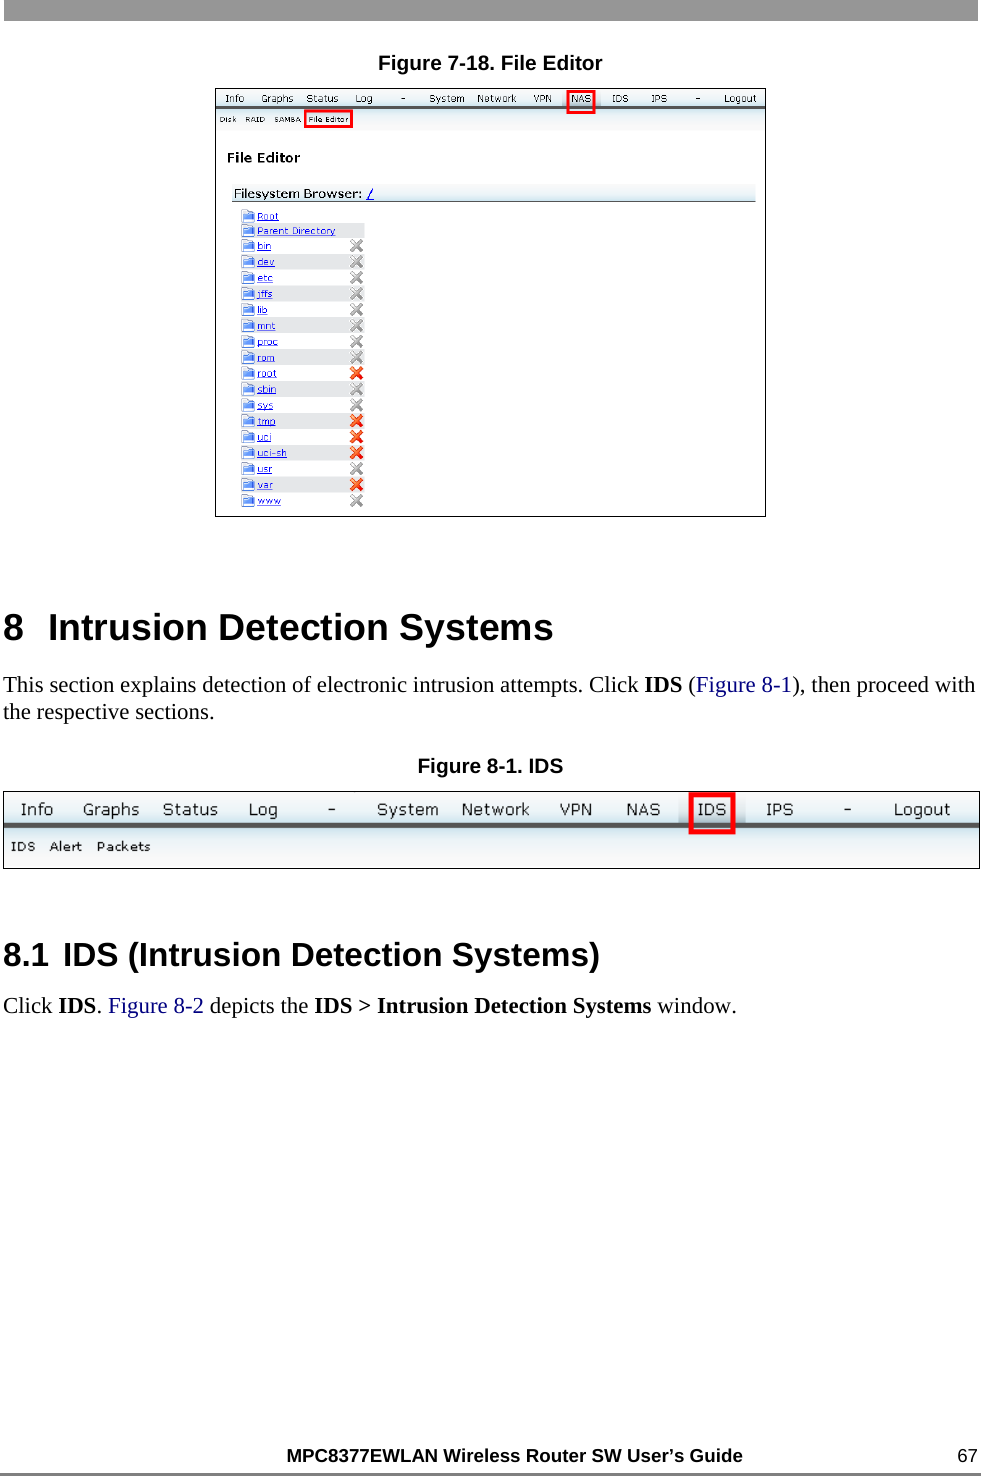                                                          MPC8377EWLAN Wireless Router SW User’s Guide    67 Figure 7-18. File Editor  8  Intrusion Detection Systems This section explains detection of electronic intrusion attempts. Click IDS (Figure 8-1), then proceed with the respective sections. Figure 8-1. IDS  8.1 IDS (Intrusion Detection Systems) Click IDS. Figure 8-2 depicts the IDS &gt; Intrusion Detection Systems window.  